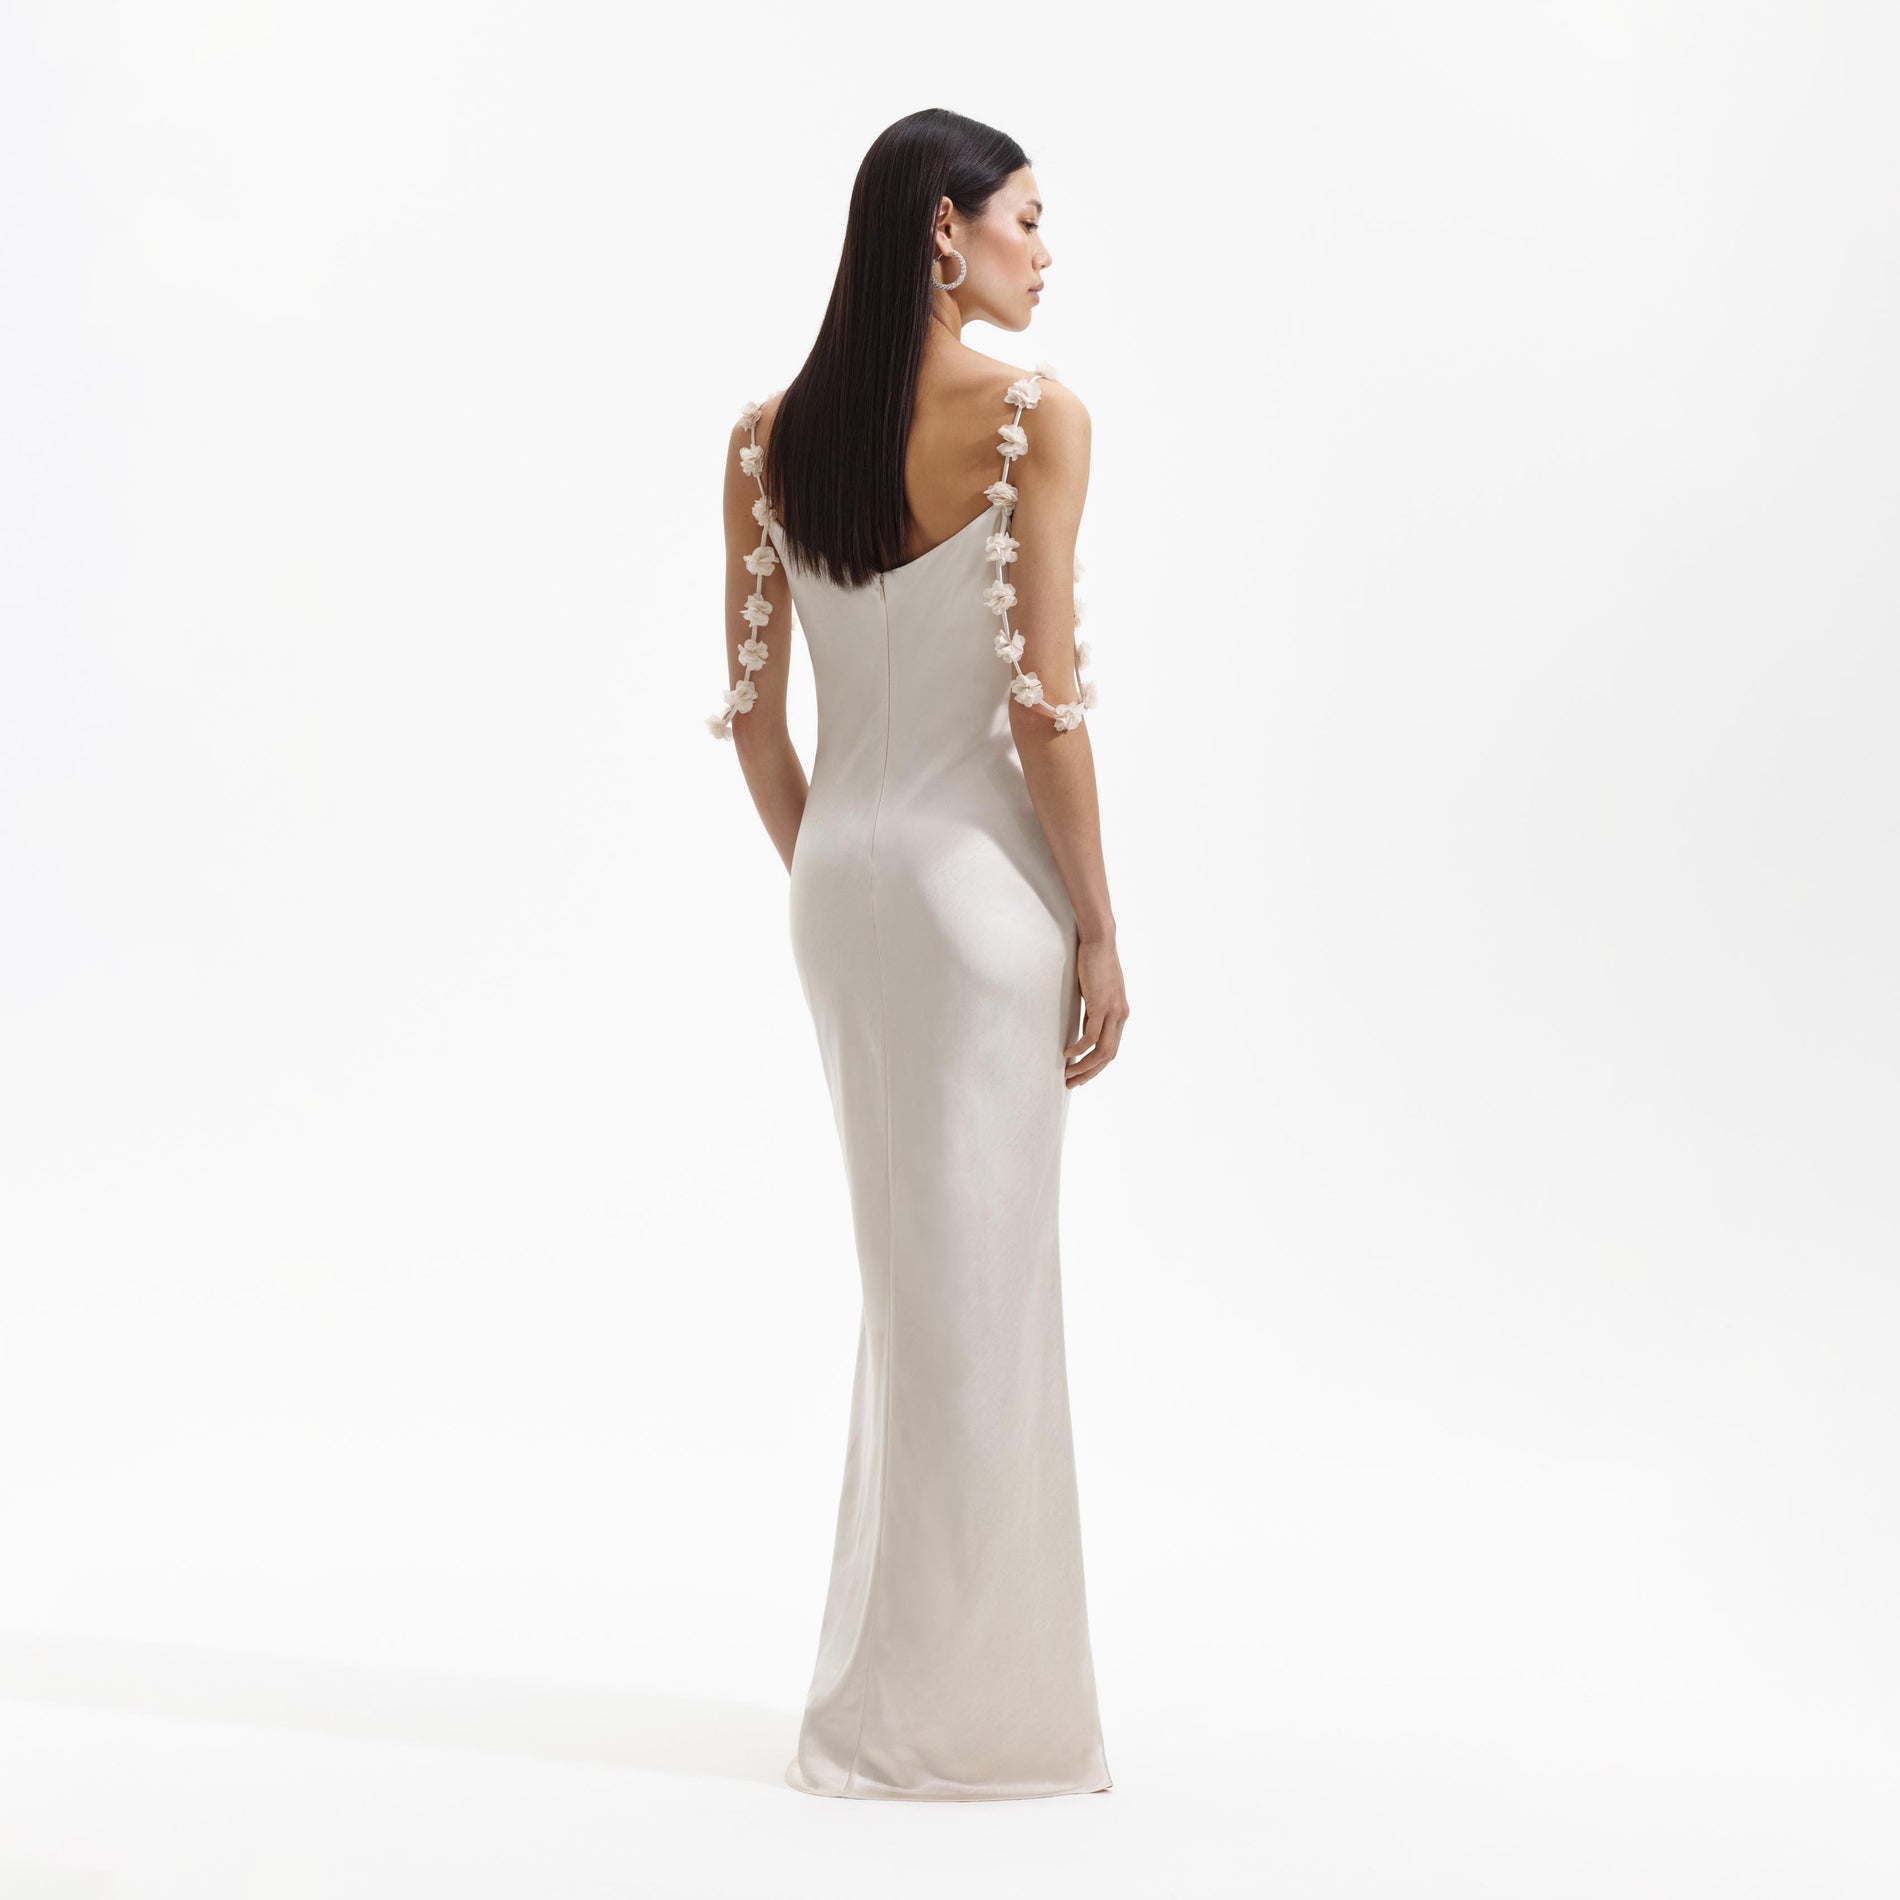 A Woman wearing the Champagne Satin Flower Maxi Dress